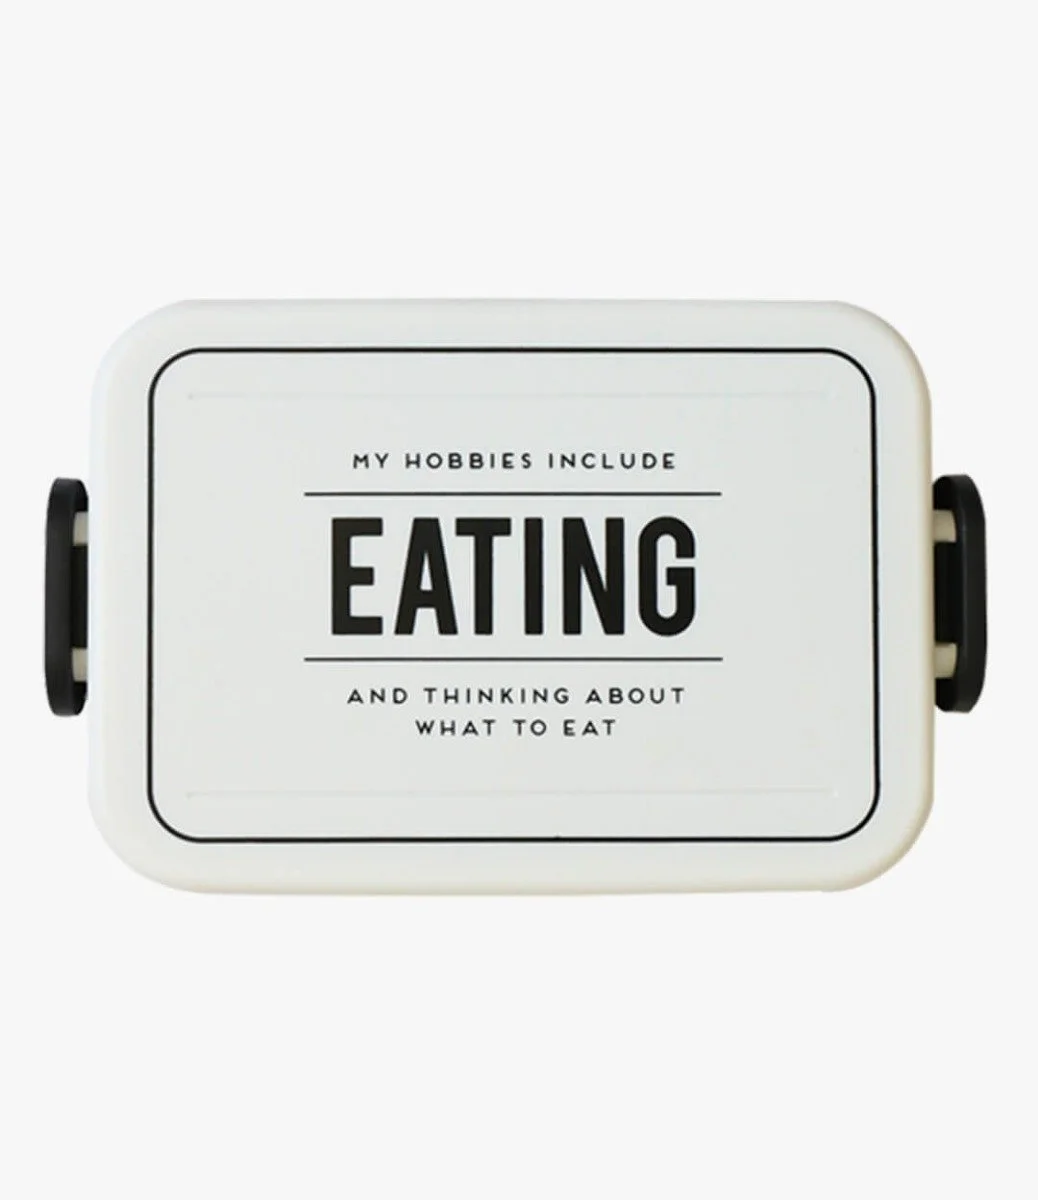 Lunch Box 'My Hobbies Include EATING' By Alice Scott